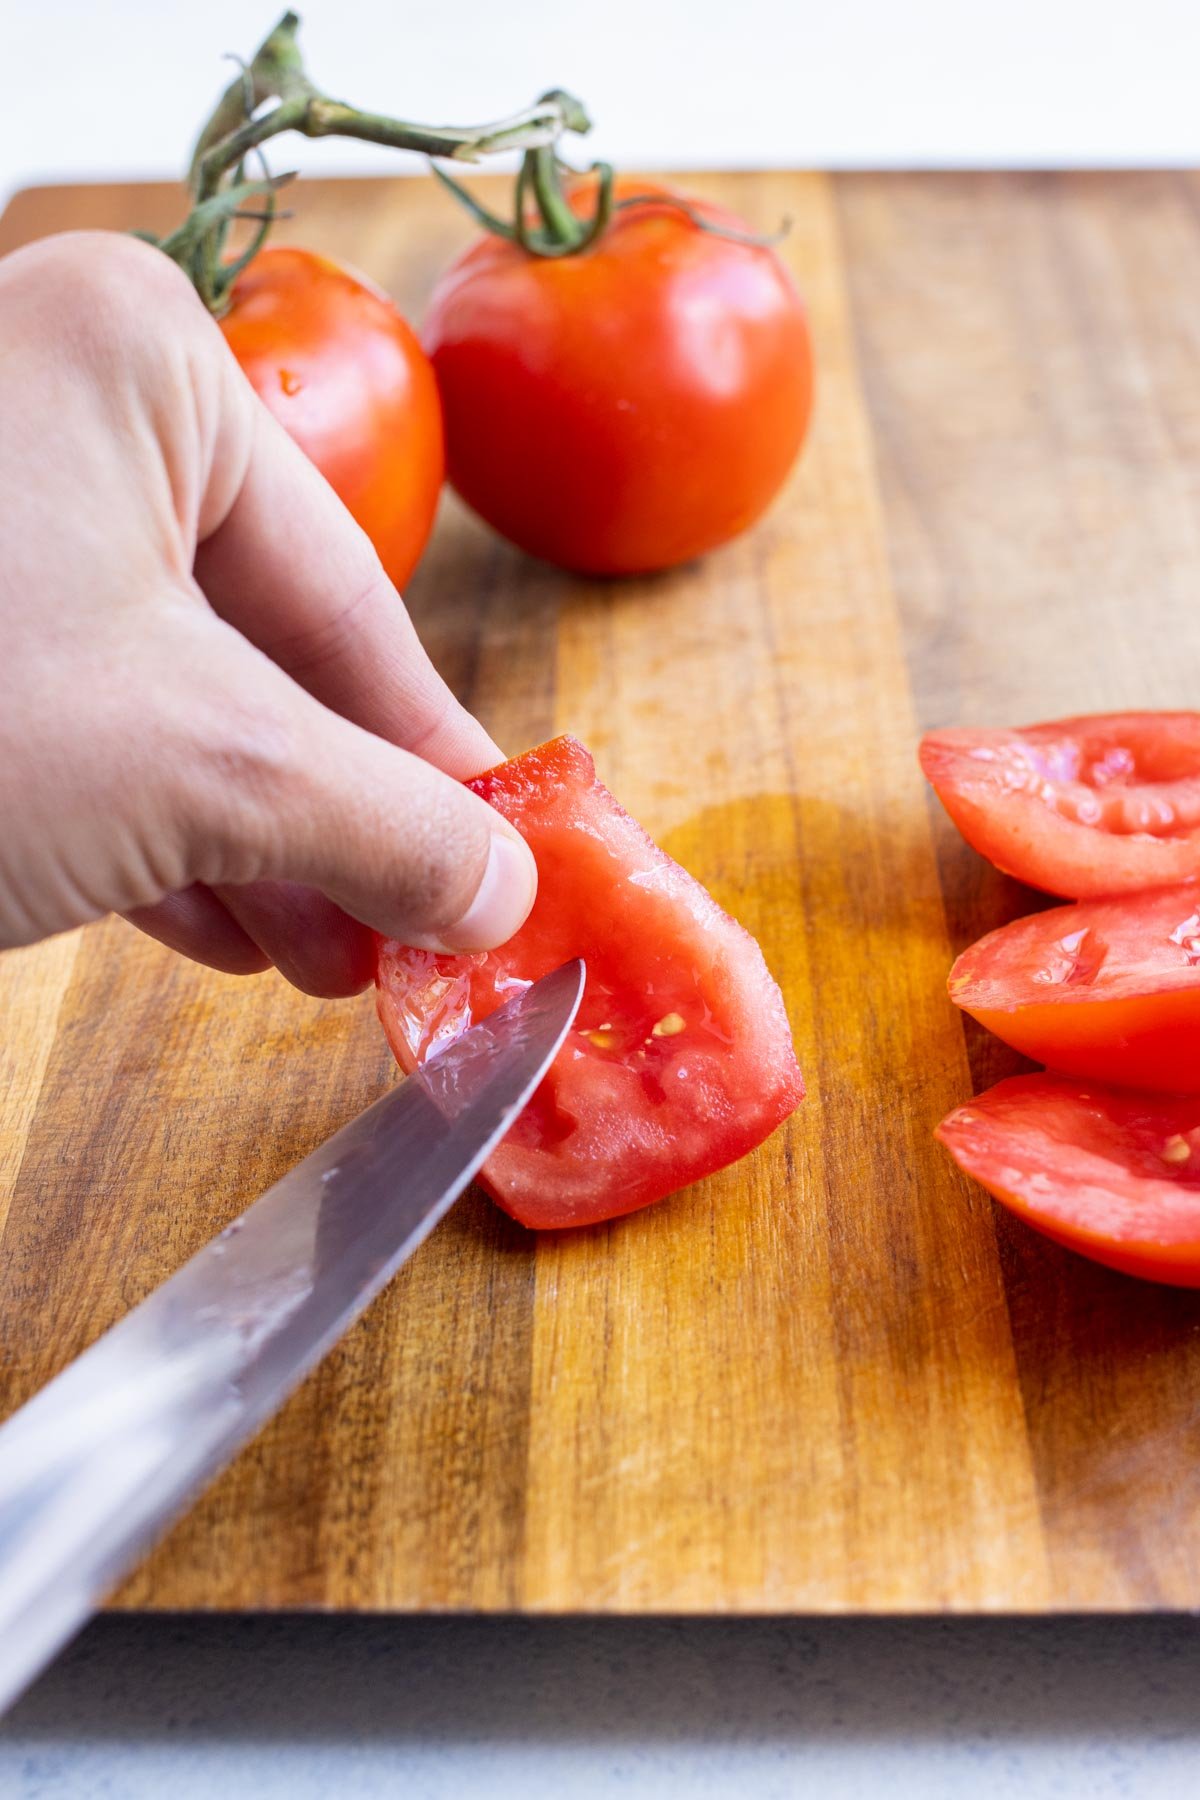 A knife carefully removes the seeds from the tomato flesh.